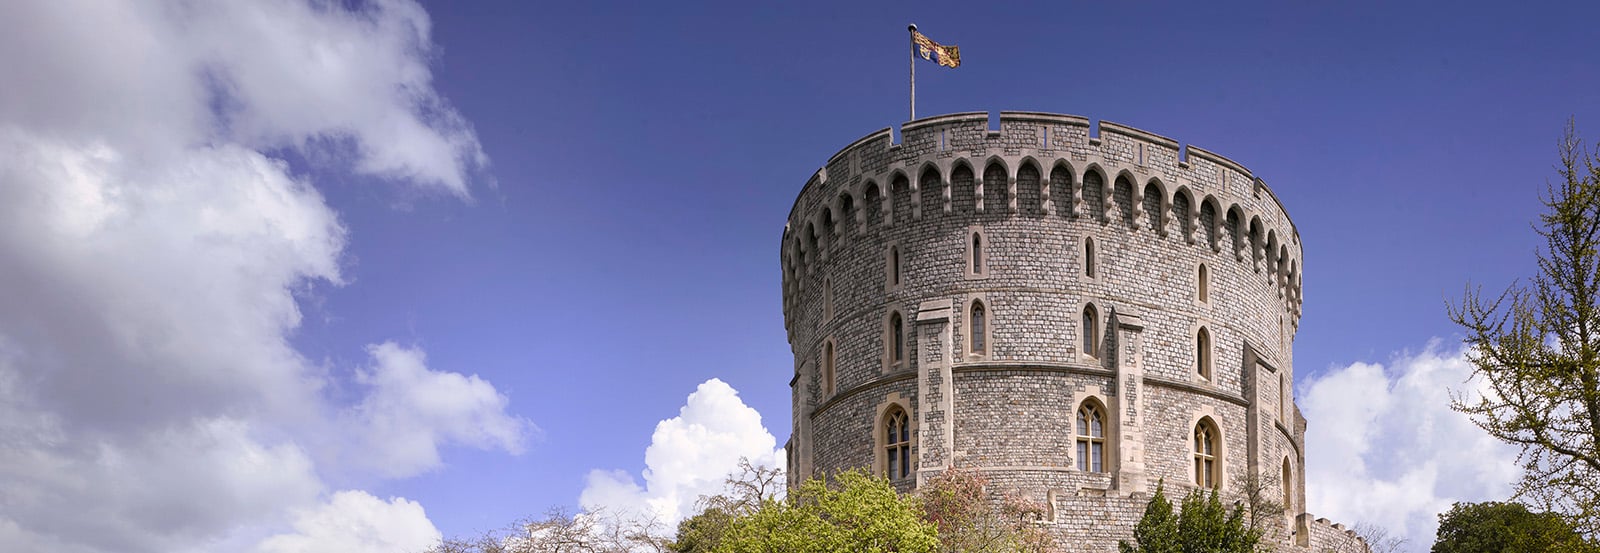 Windsor Castle's Round Tower